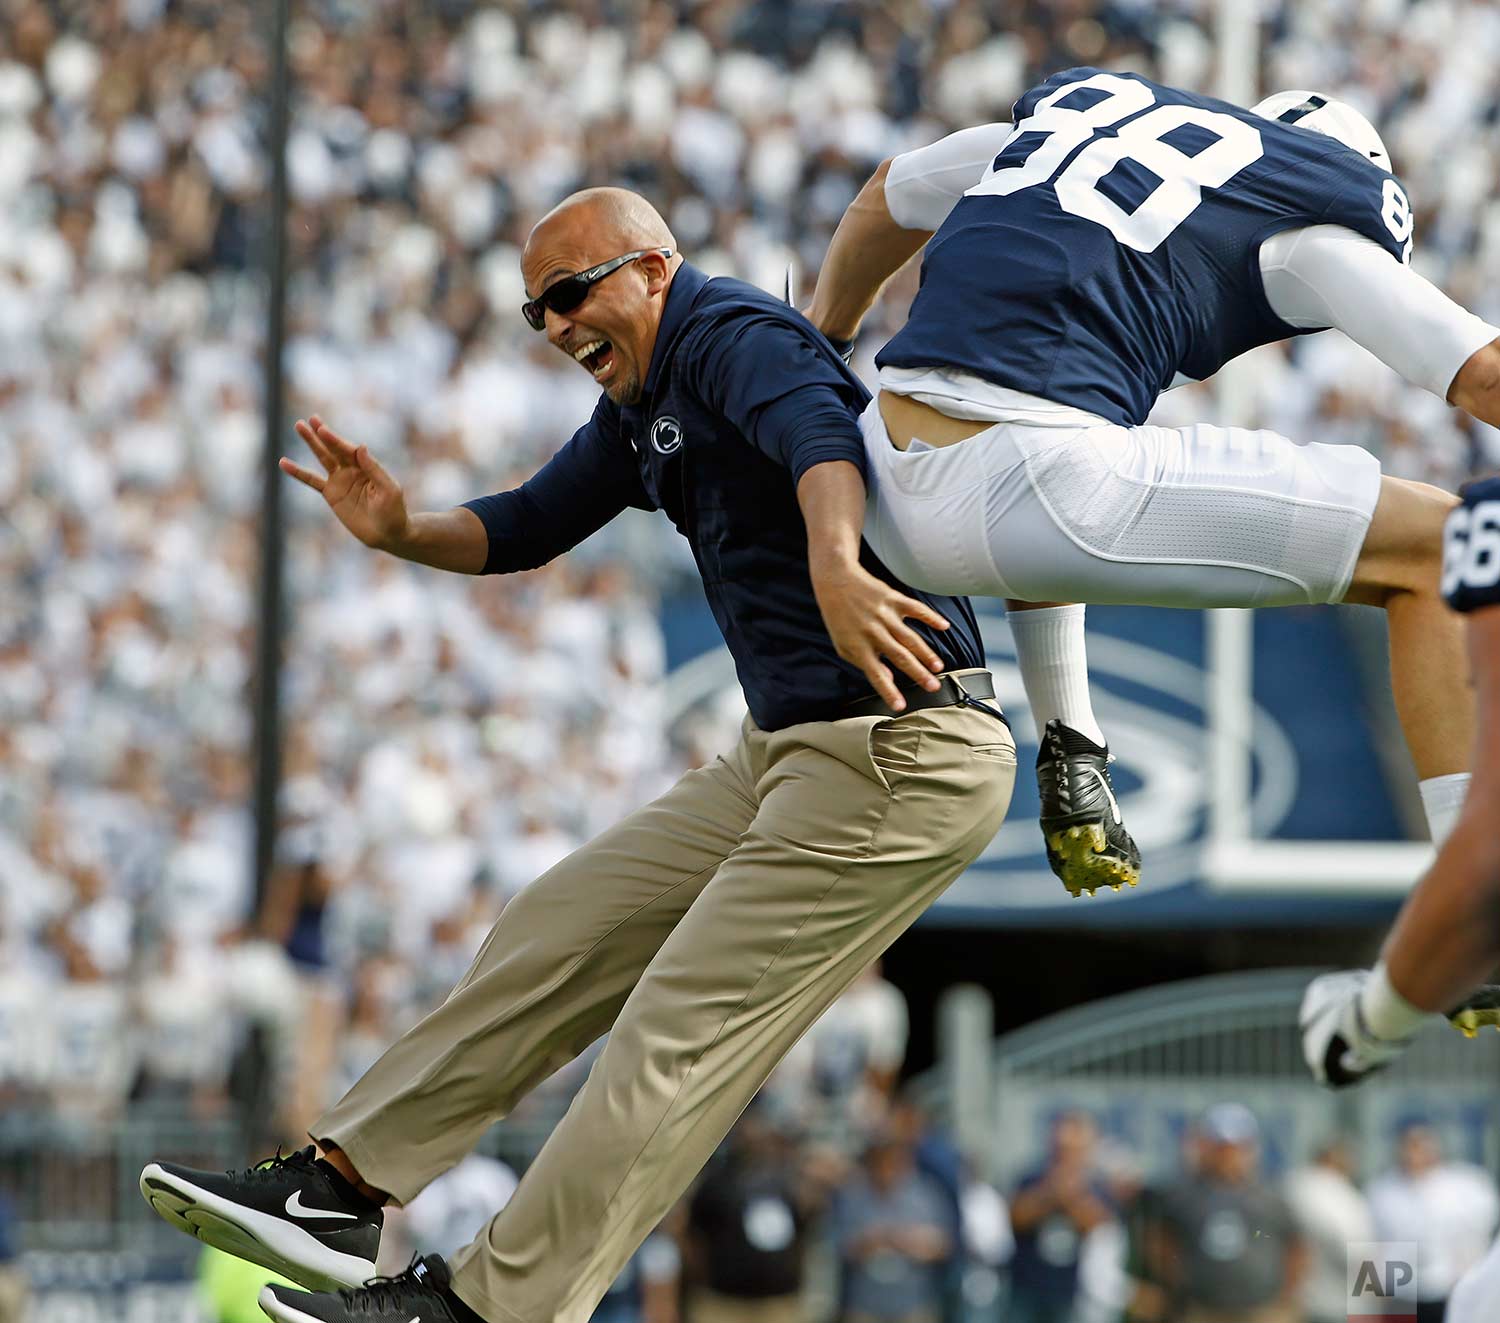  Penn State head coach James Franklin, left, celebrates with tight end Mike Gesicki (88) after Gesicki scored a touchdown against Pittsburgh during the first half of an NCAA college football game in State College, Pa., Saturday, Sept. 9, 2017. (AP Ph